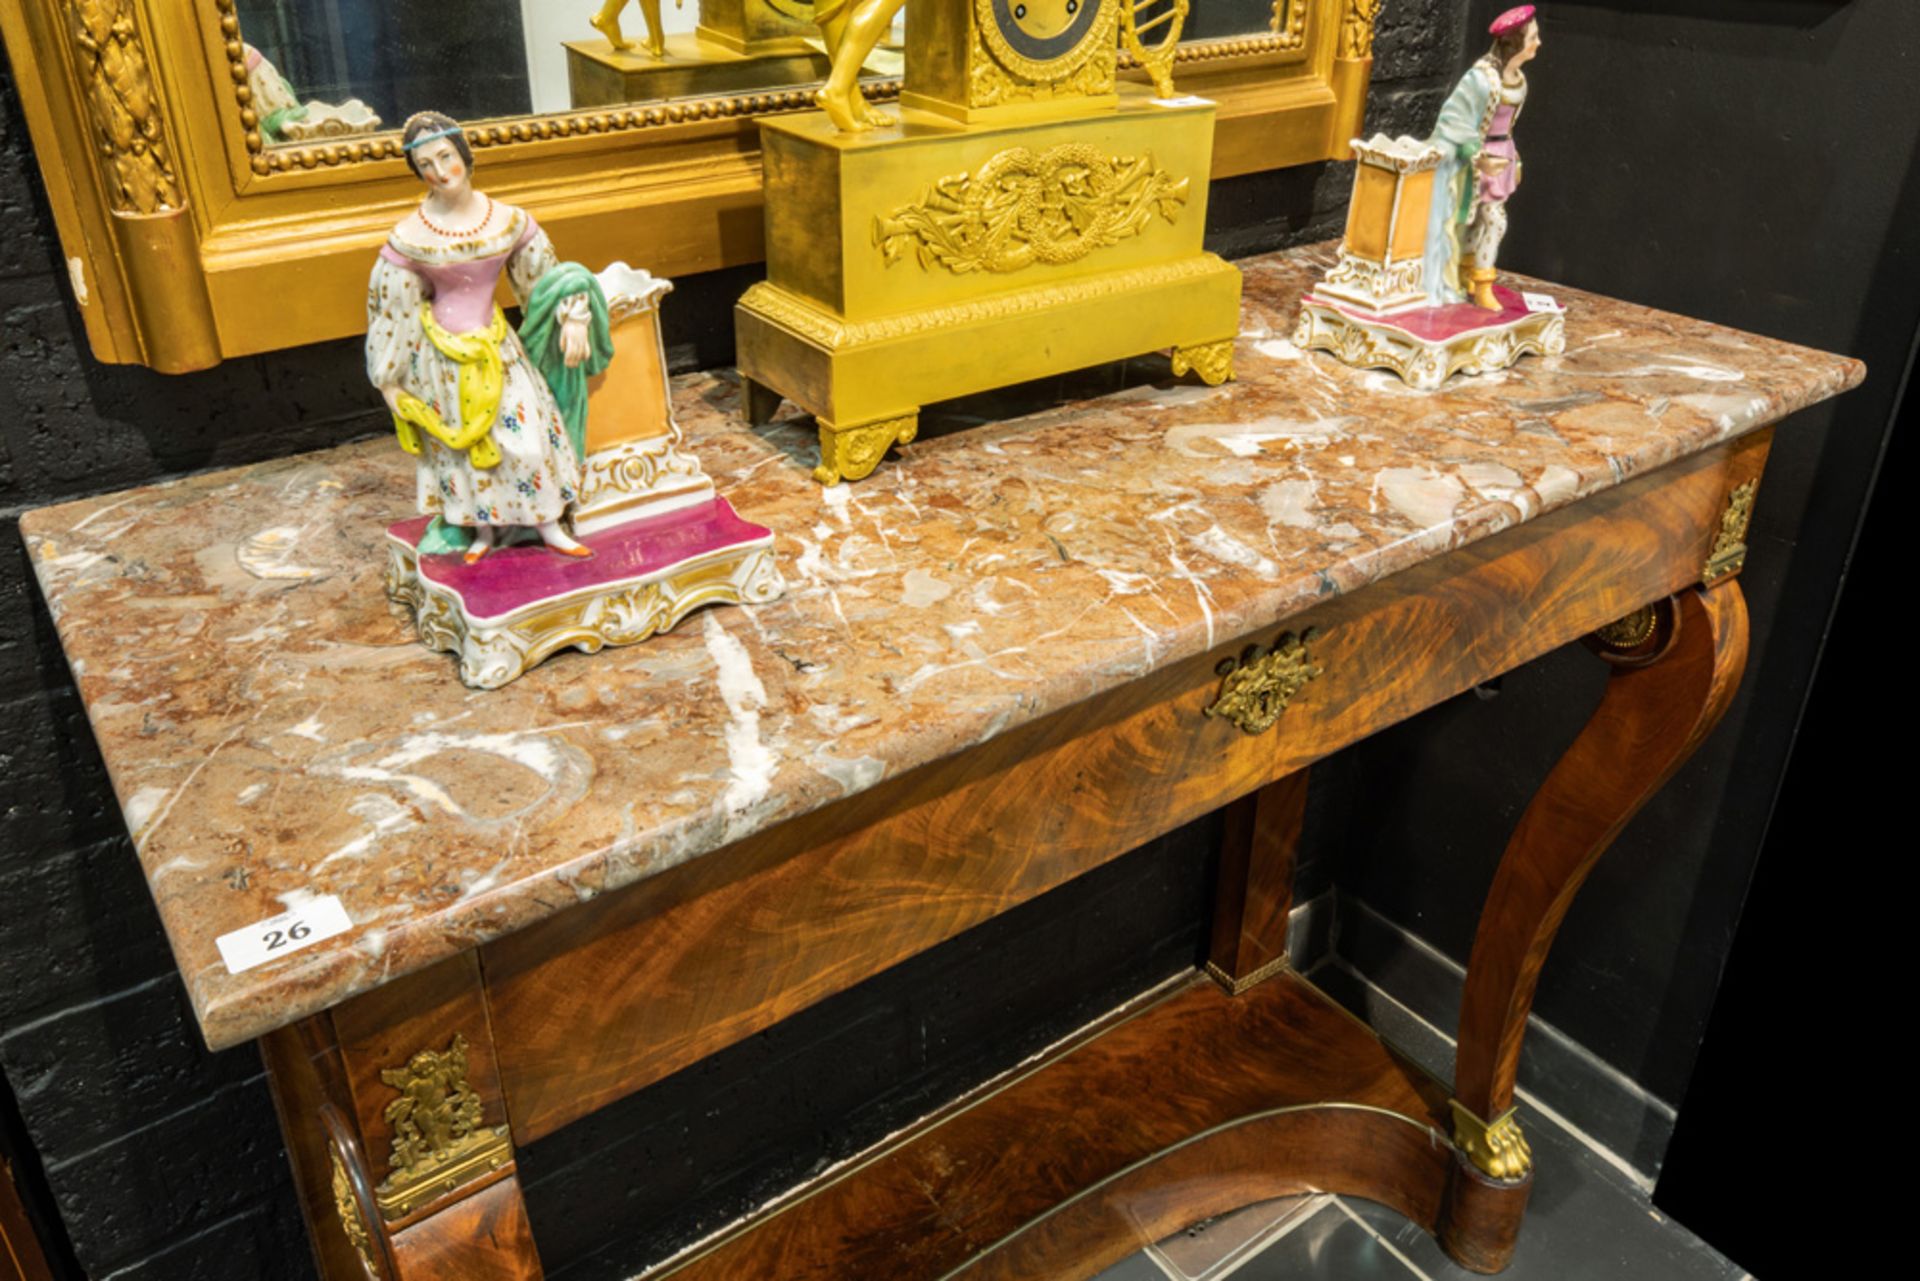 early 19th Cent. Empire style console in mahogany with ornaments in gilded bronze - with a drawer - Image 3 of 3